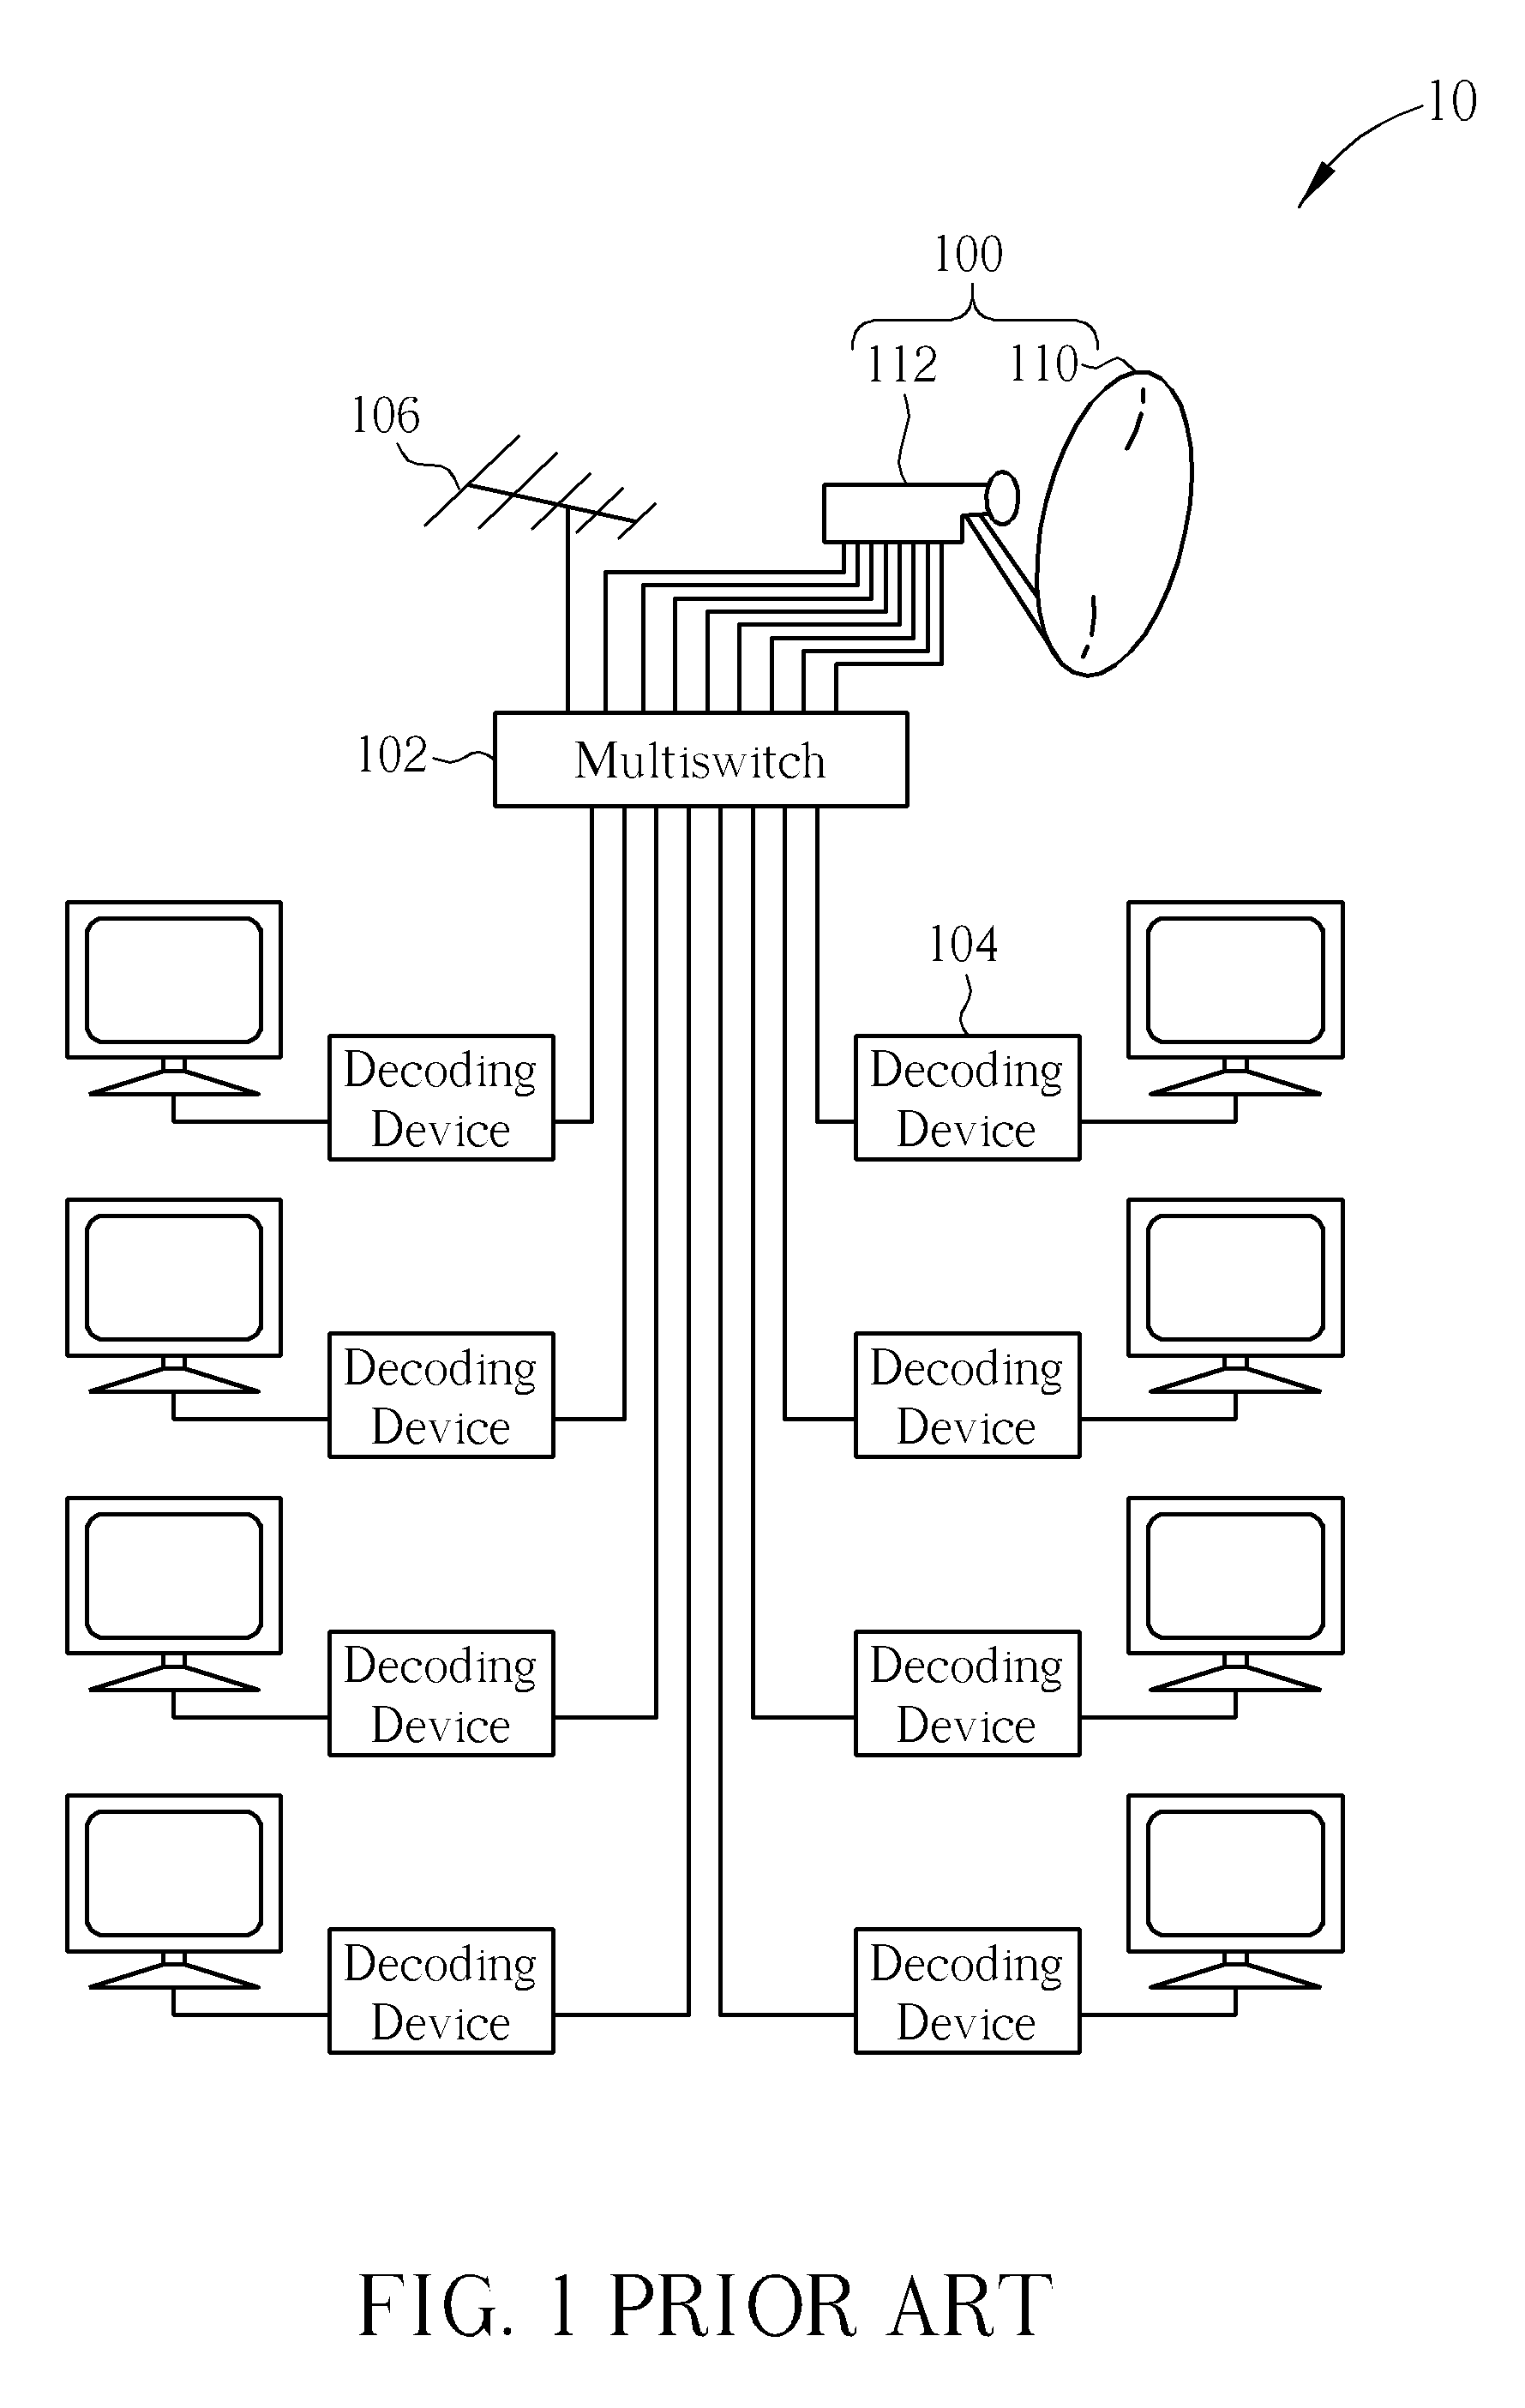 Optical Low-Noise Block Downconverter, Multiple Dwelling Unit, and Related Satellite Television System